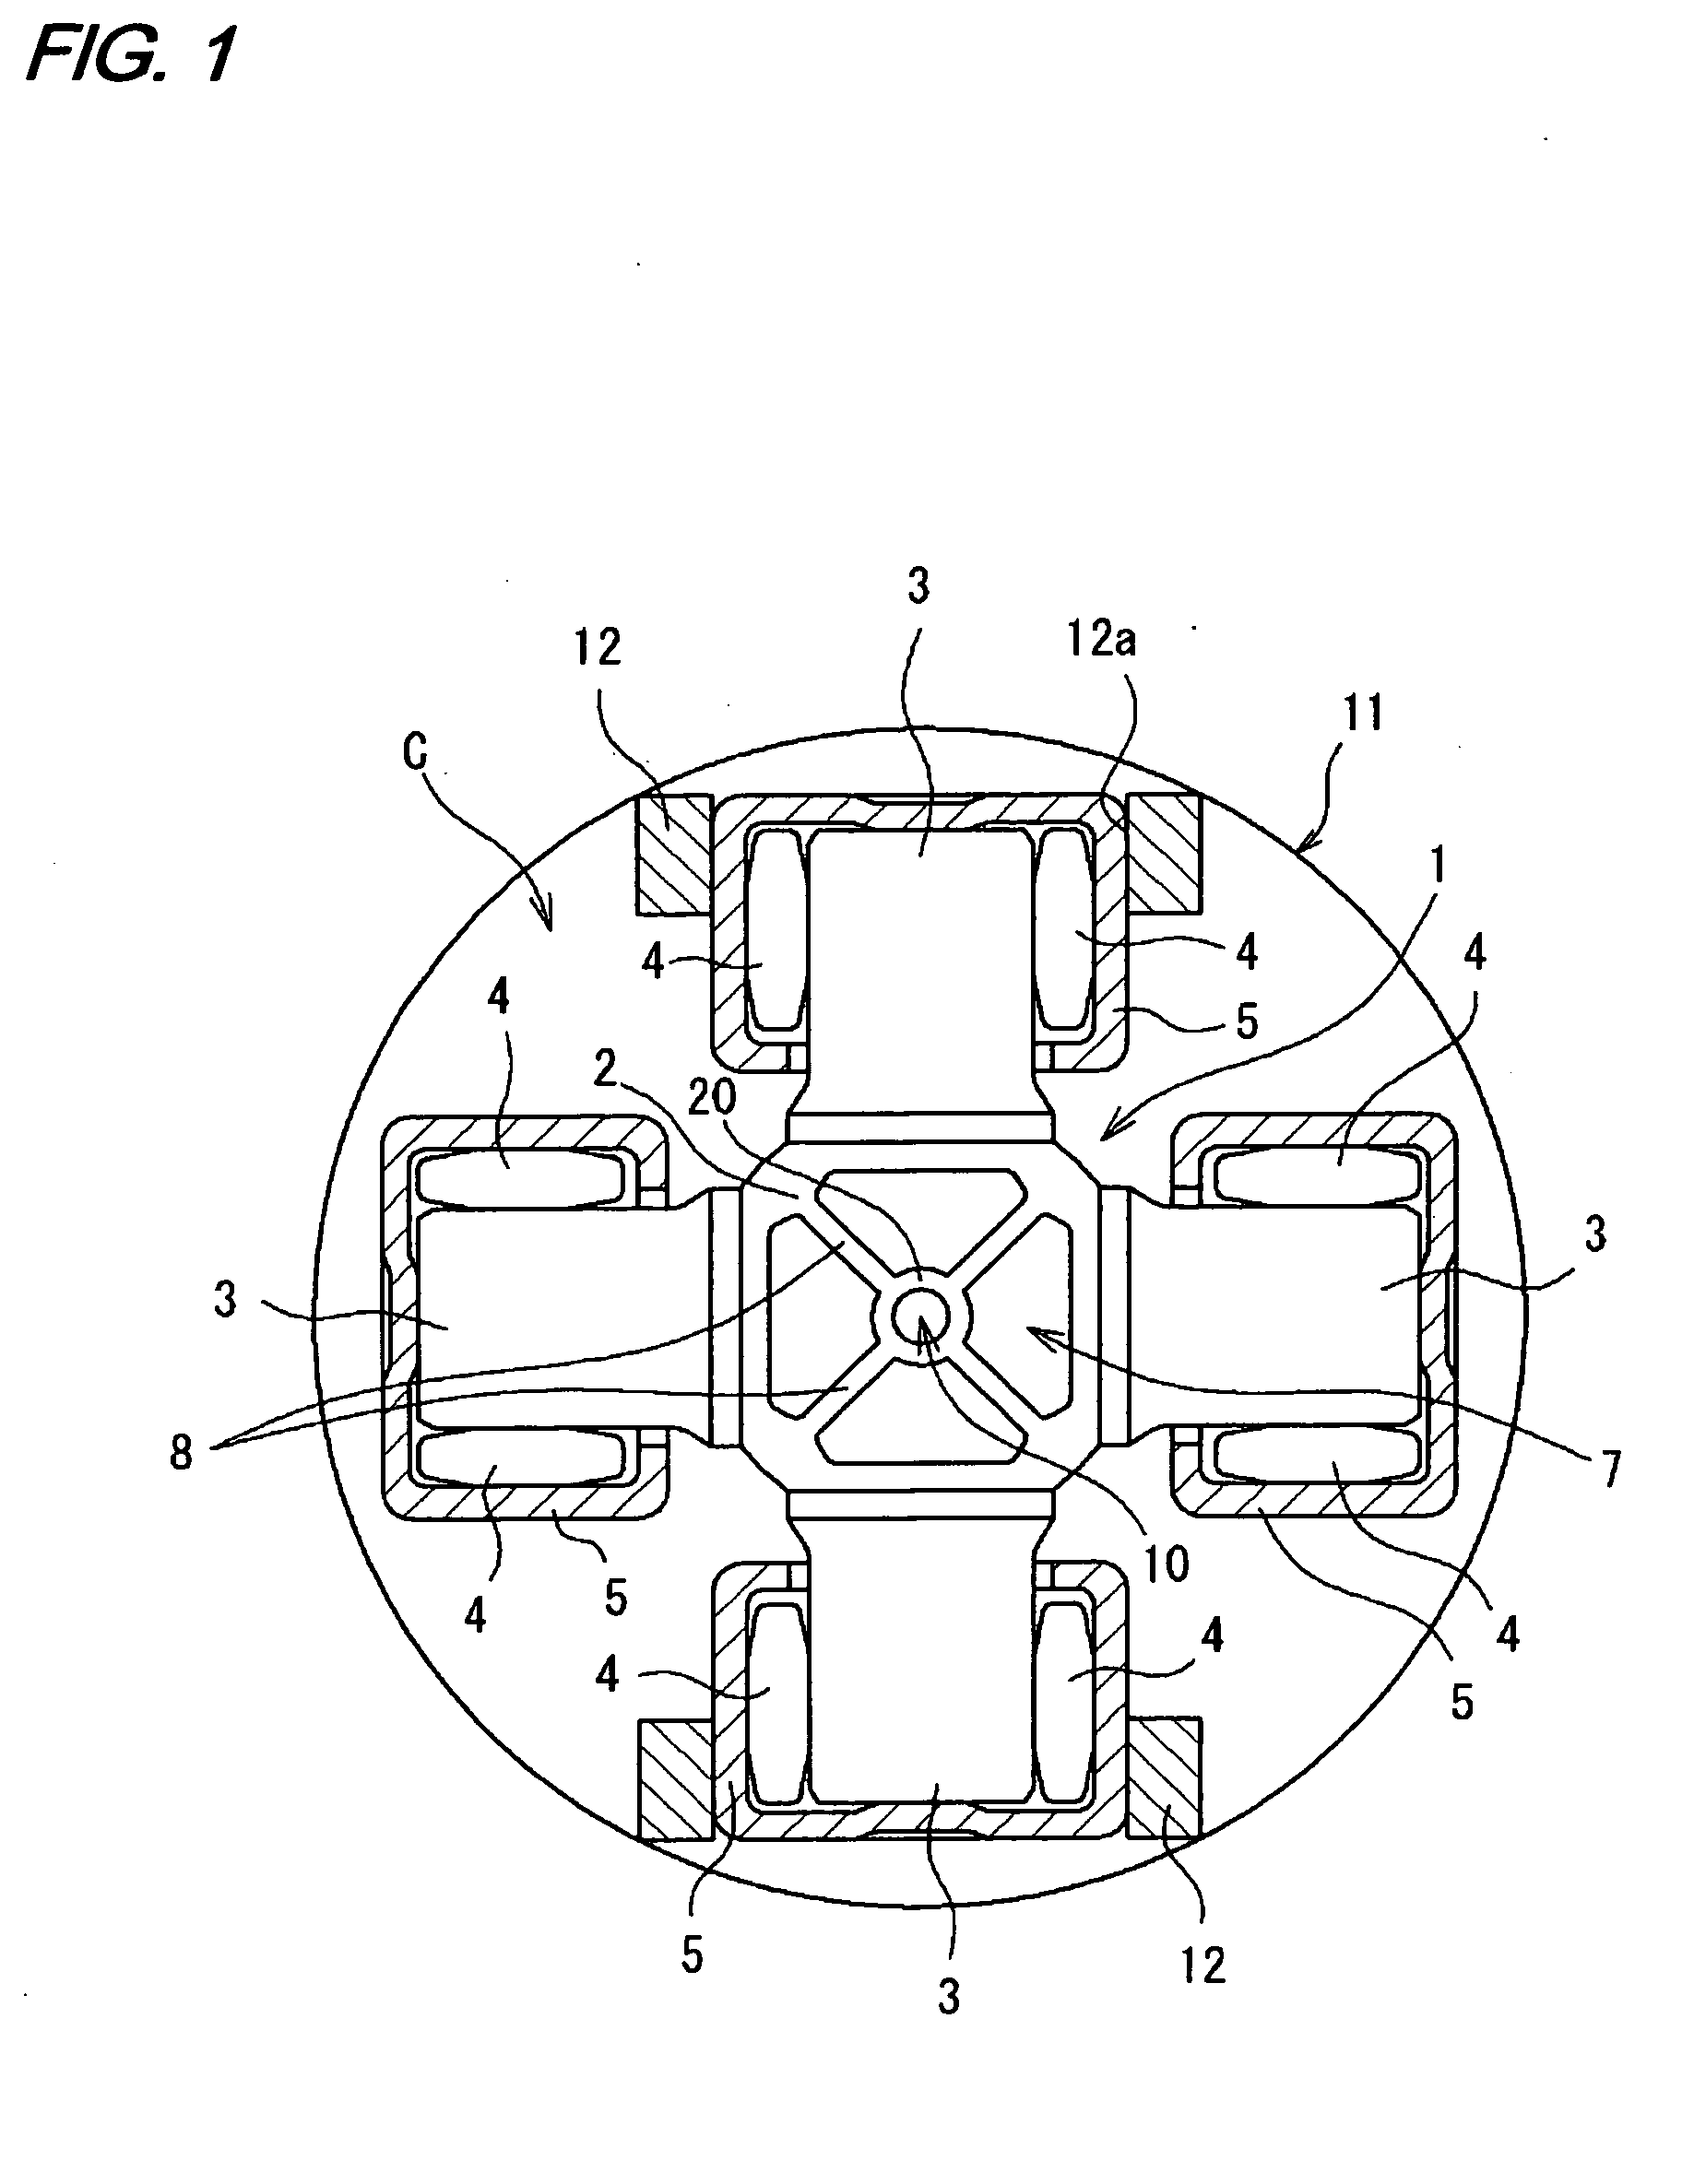 Cross shaft member and cross shaft joint with the same